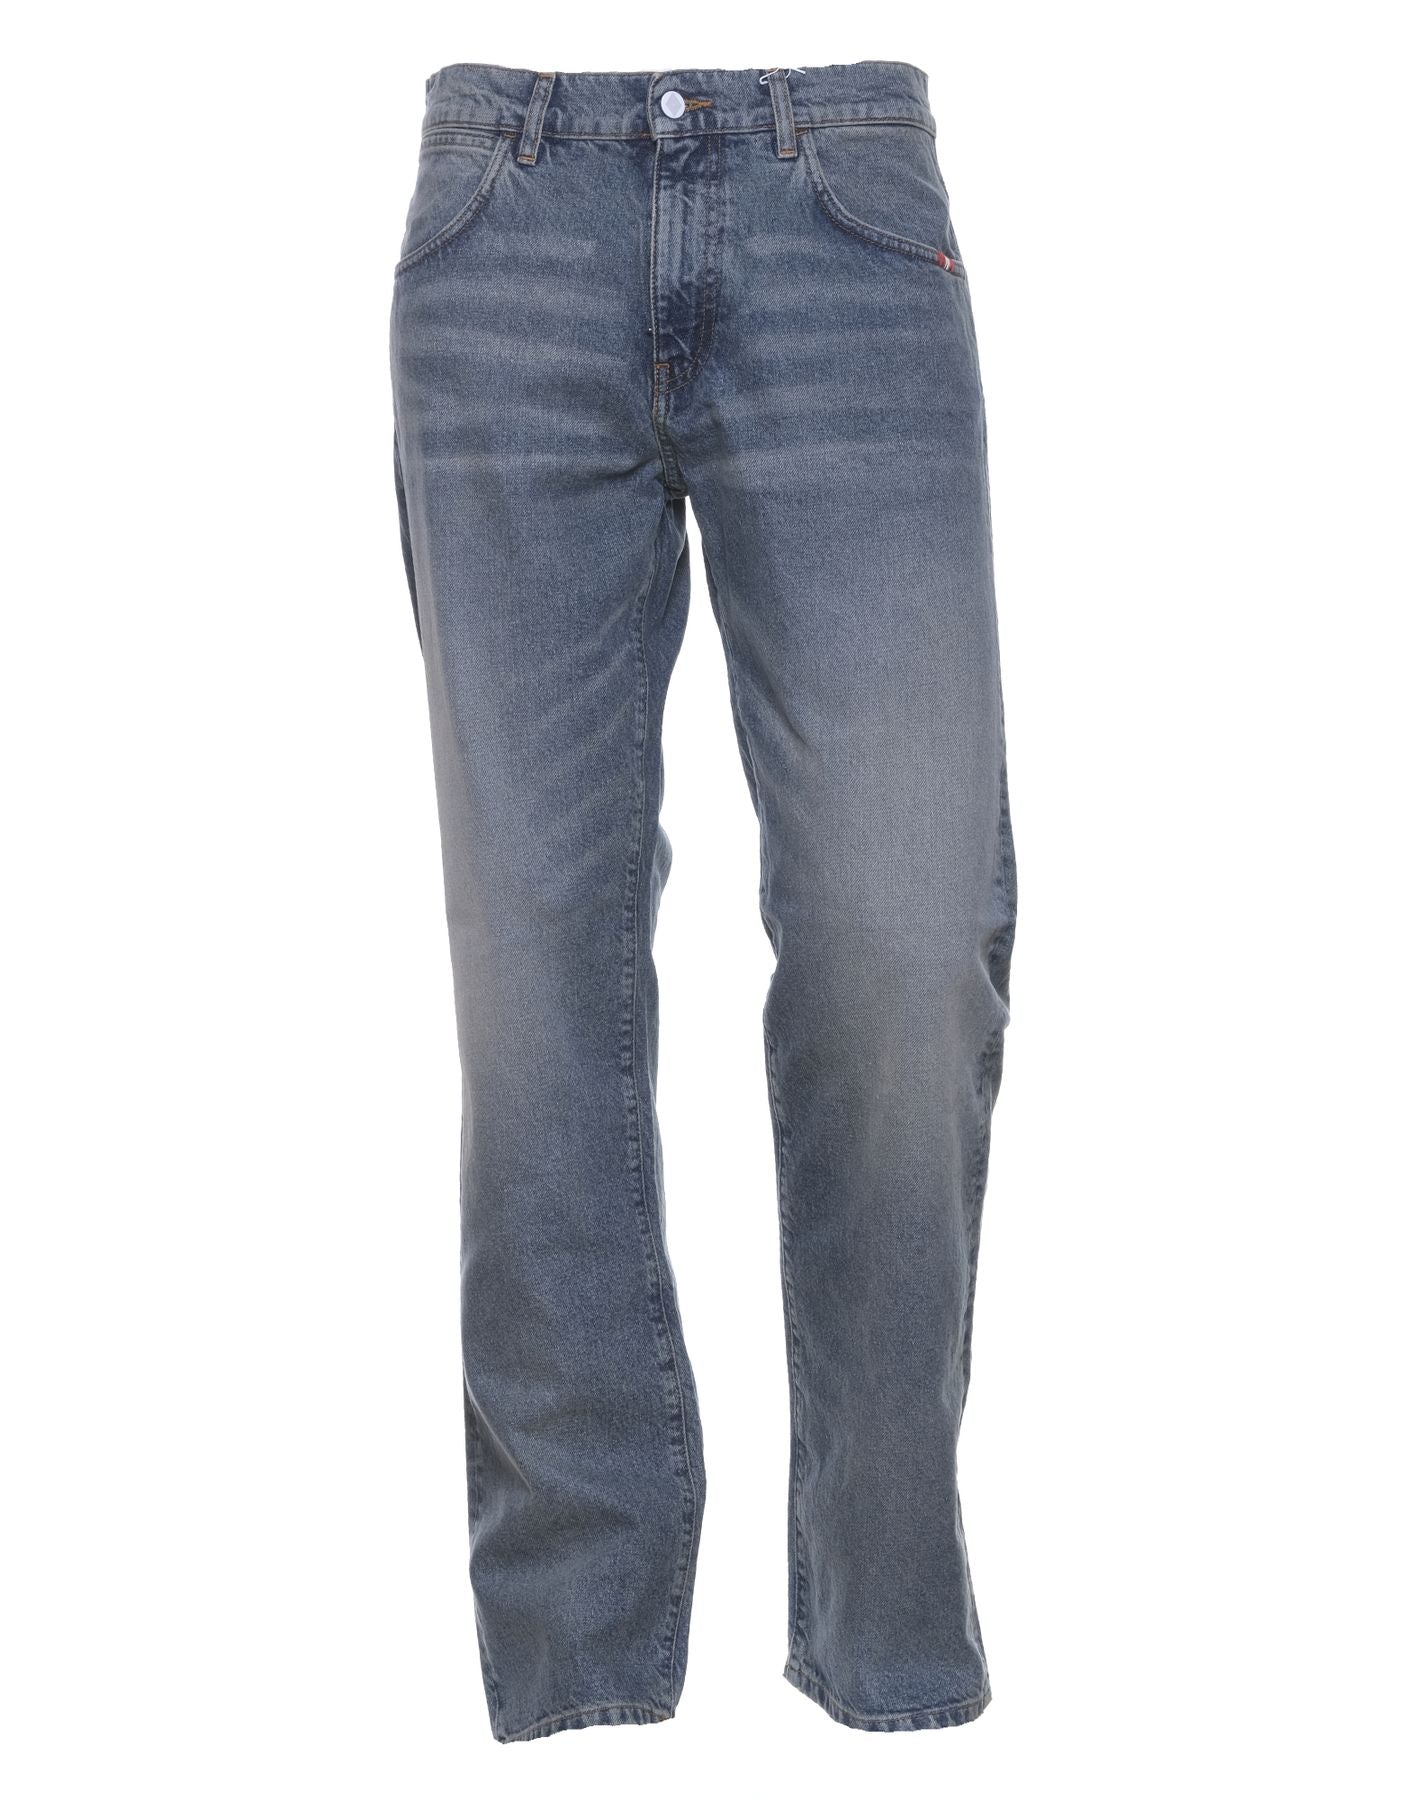 Jeans for man AMU010D4692504 SUPER DIRTY Amish